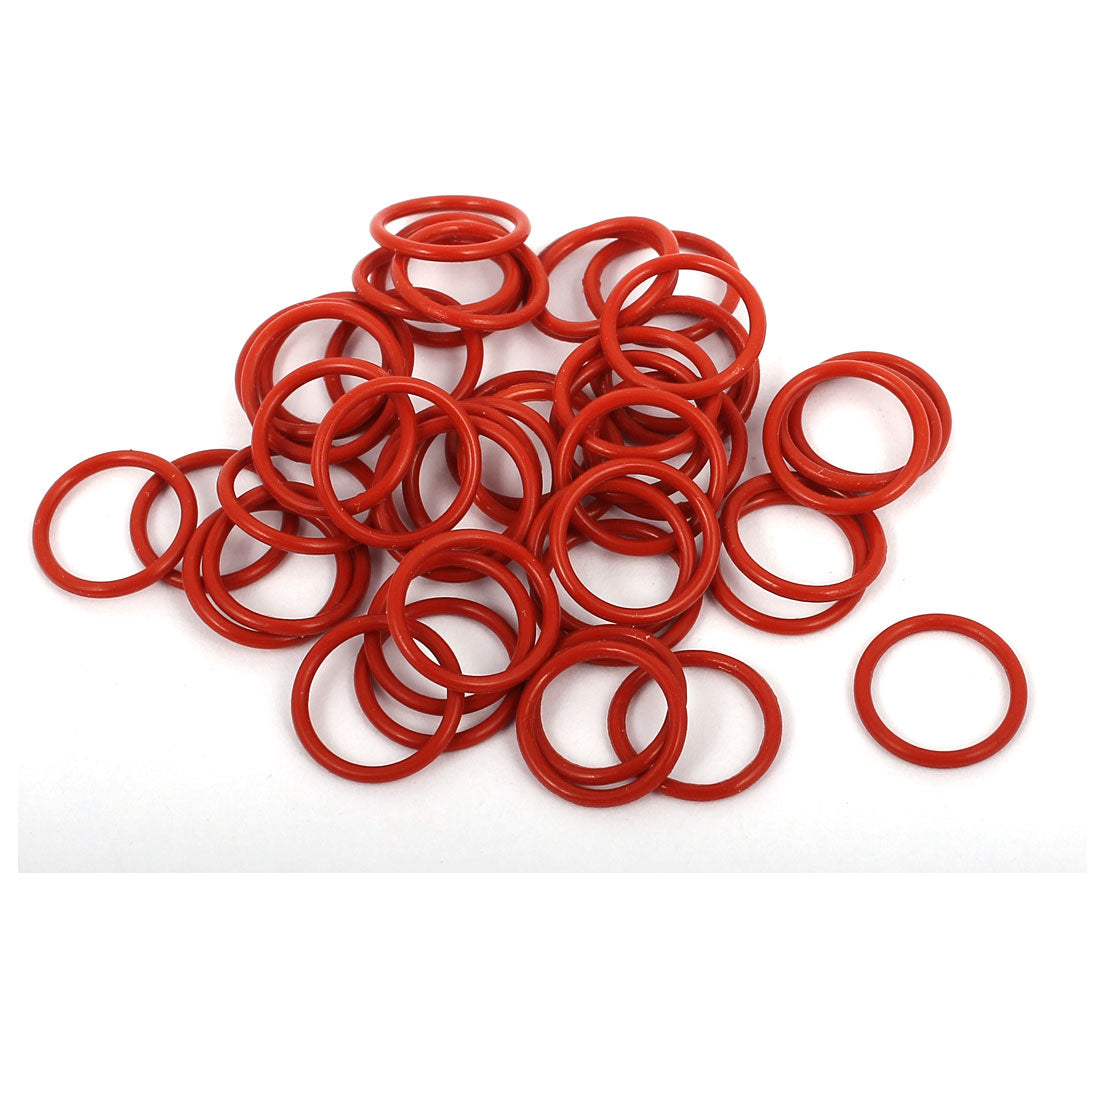 uxcell Uxcell 50Pcs 10mm x 1mm Rubber O-rings Sealing Ring Grommets Red